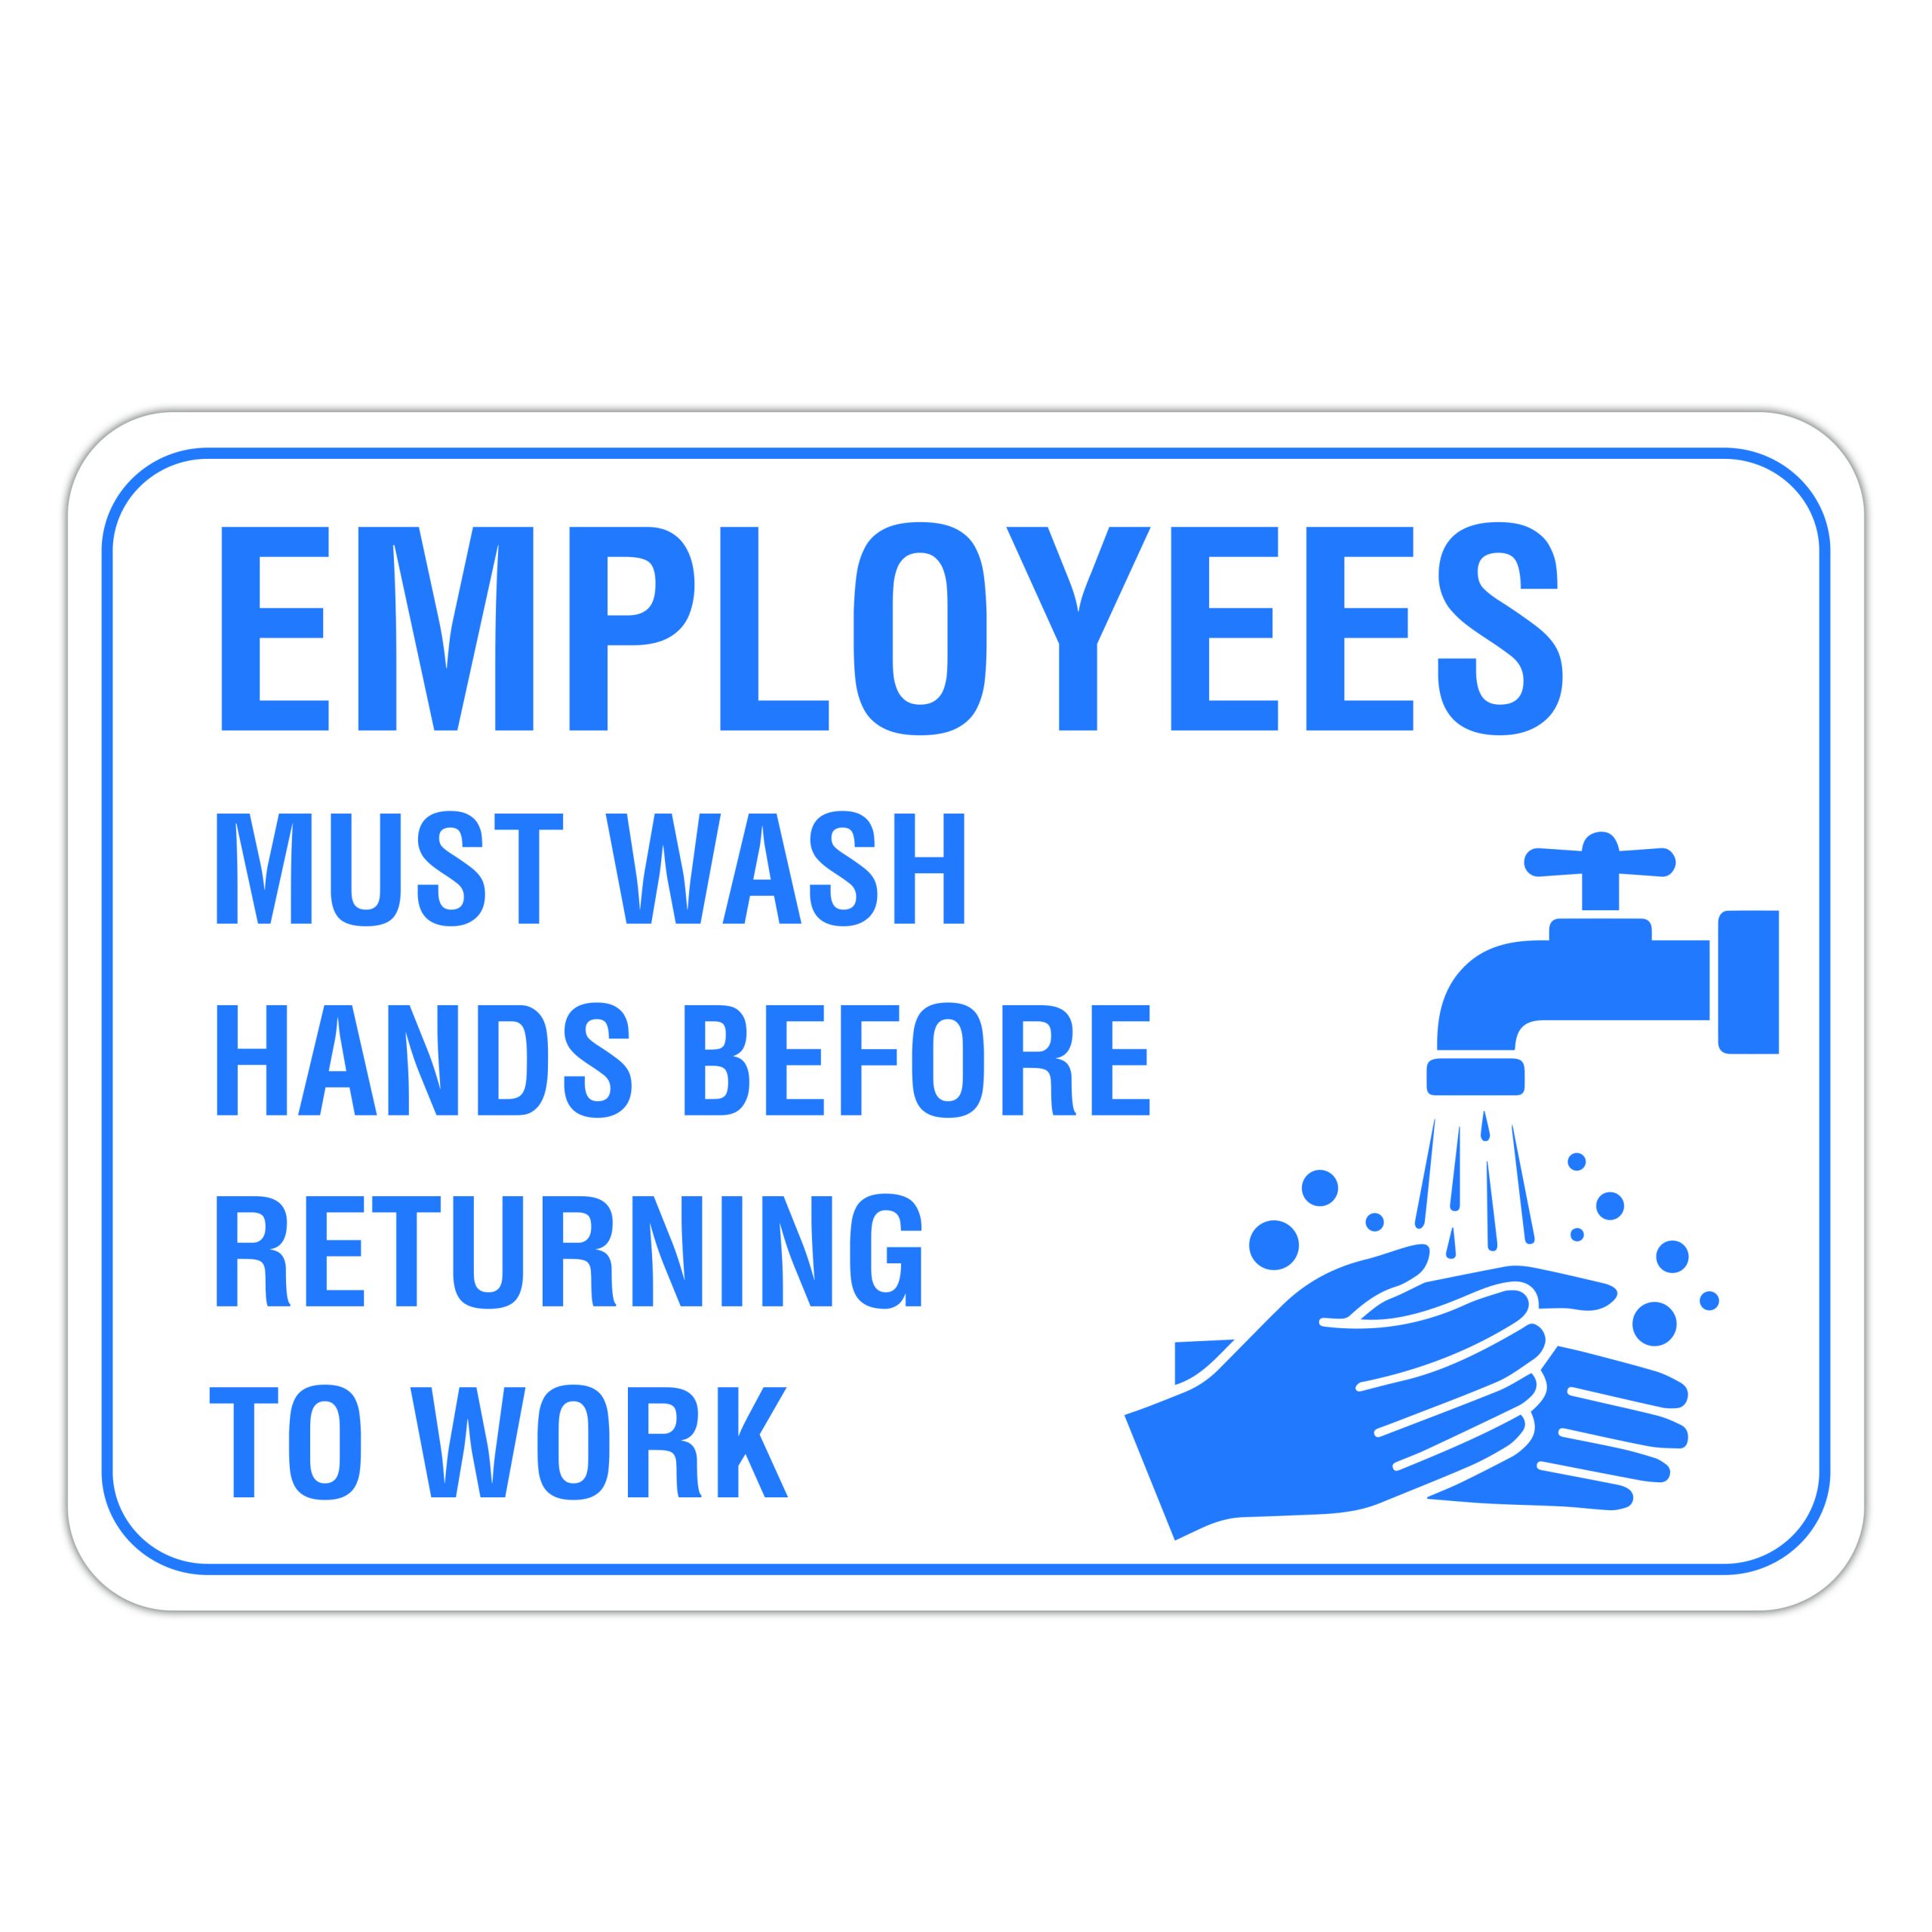 EMPLOYEES MUST WASH HANDS American Sign Company